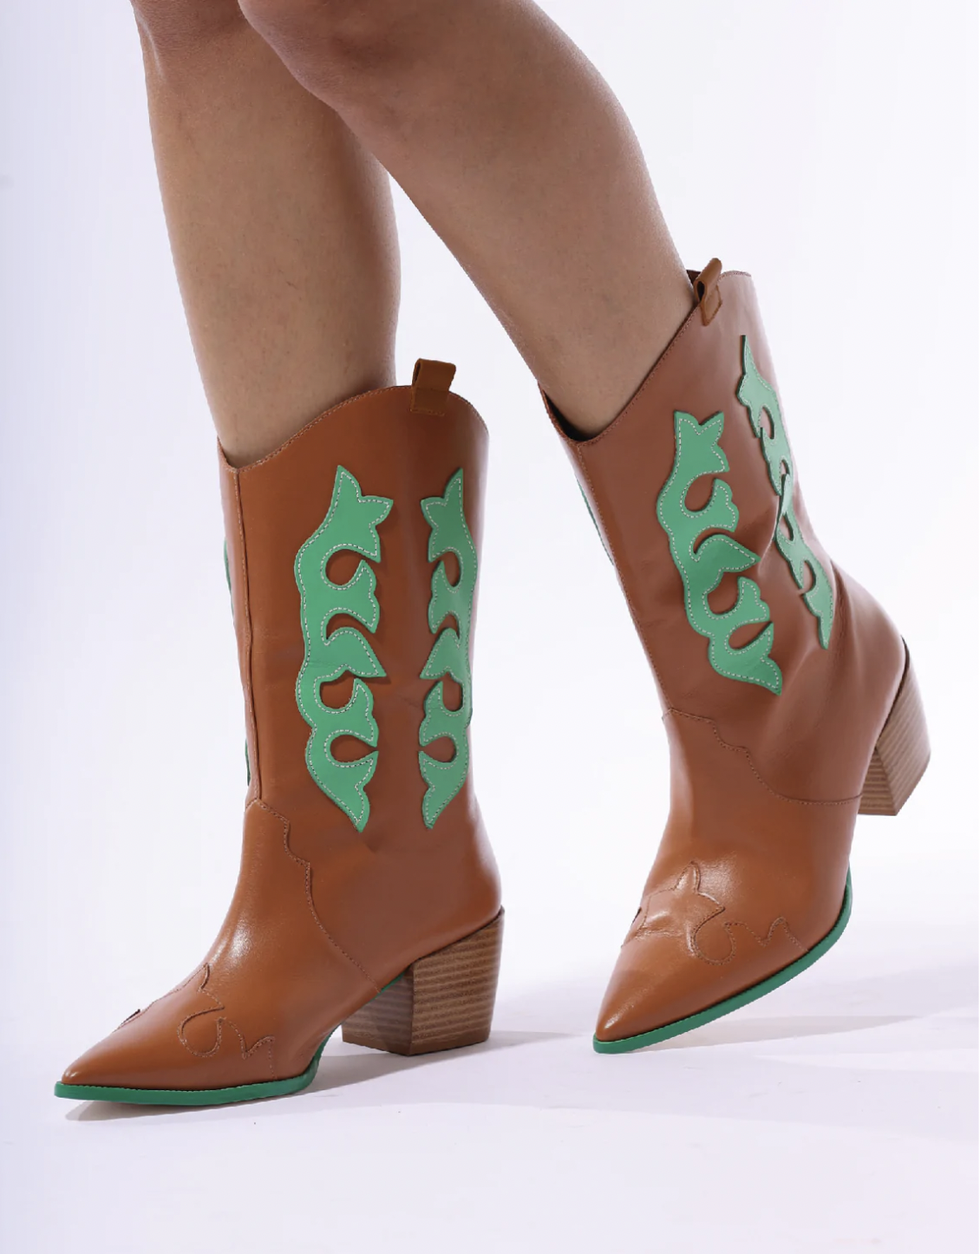 33 Cowboy Boot Style ideas in 2023